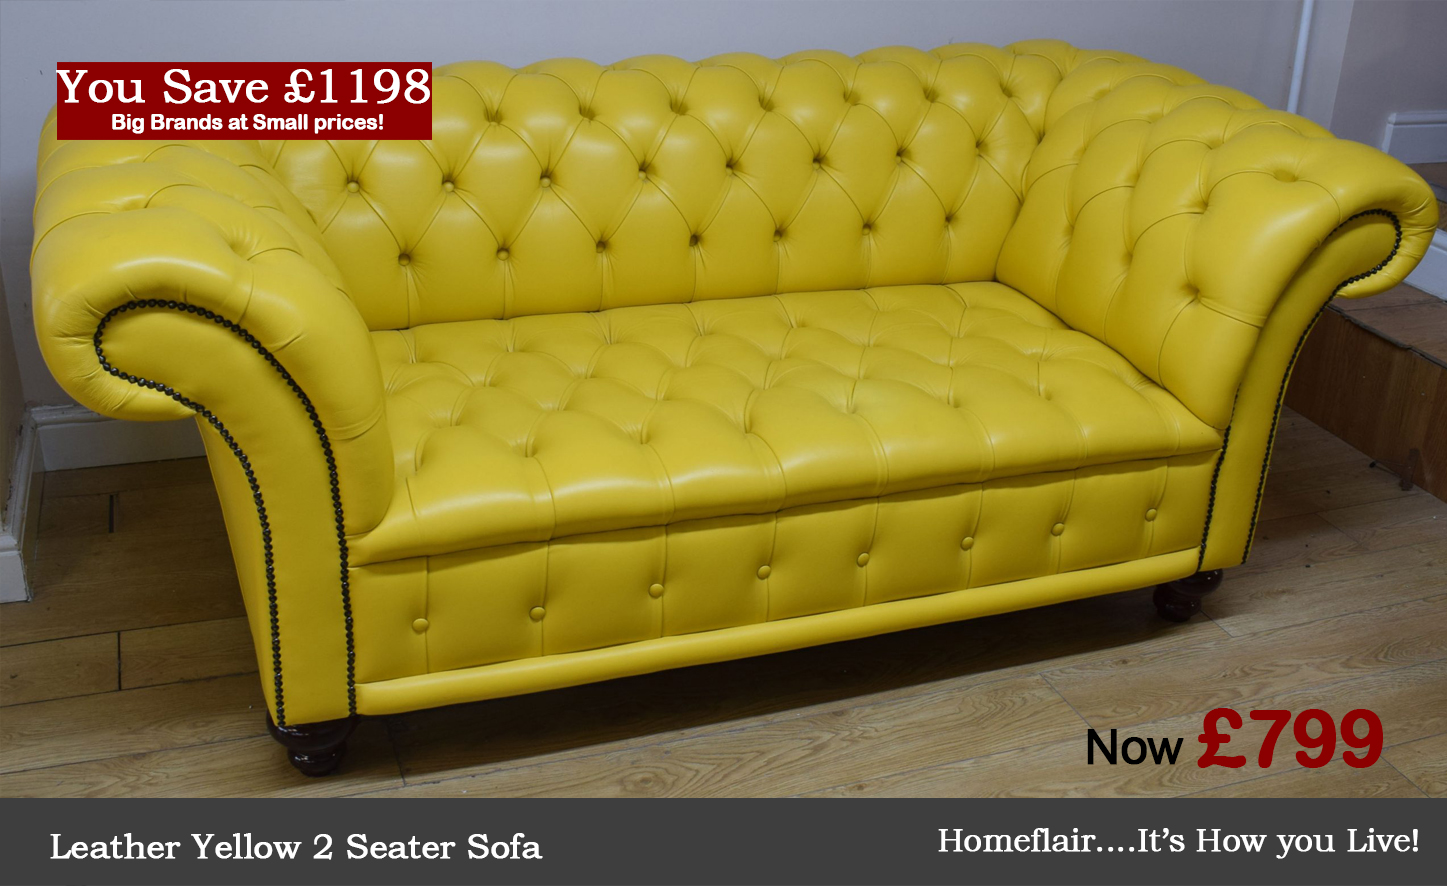 Ercup Yellow Leather 2 Seater